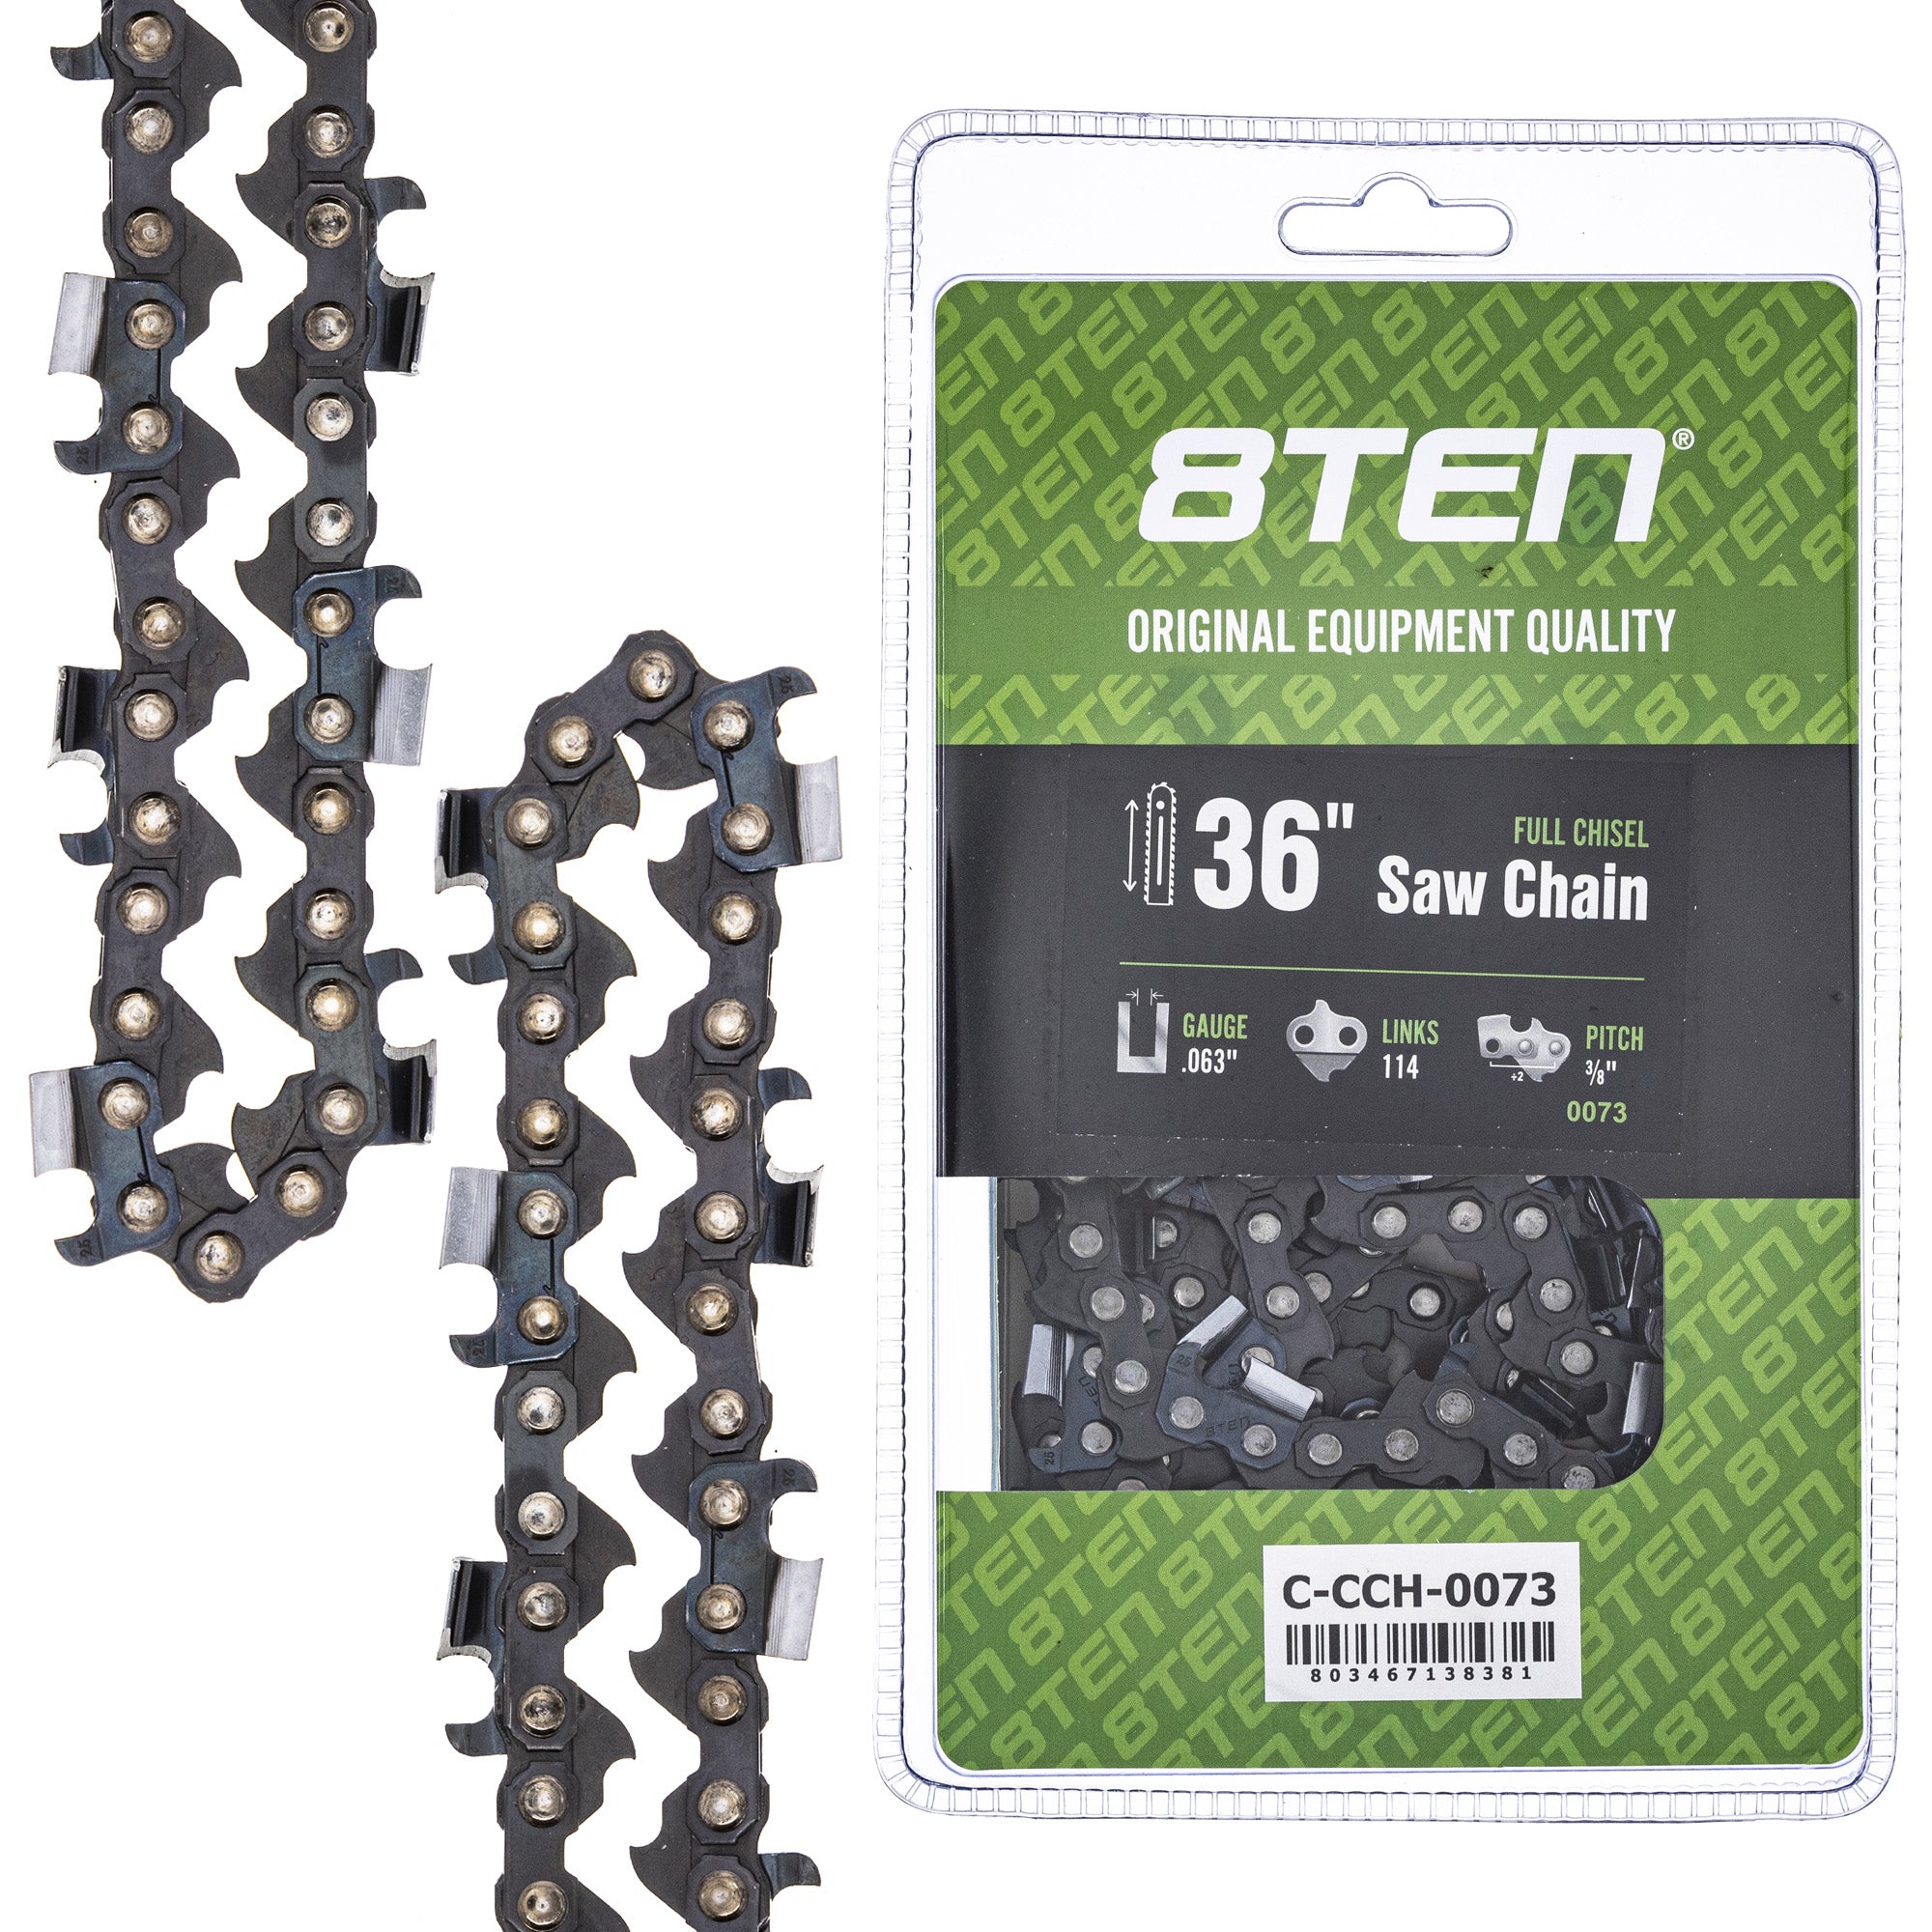 8TEN MK1010269 Guide Bar & Chain for MSE MS E 634